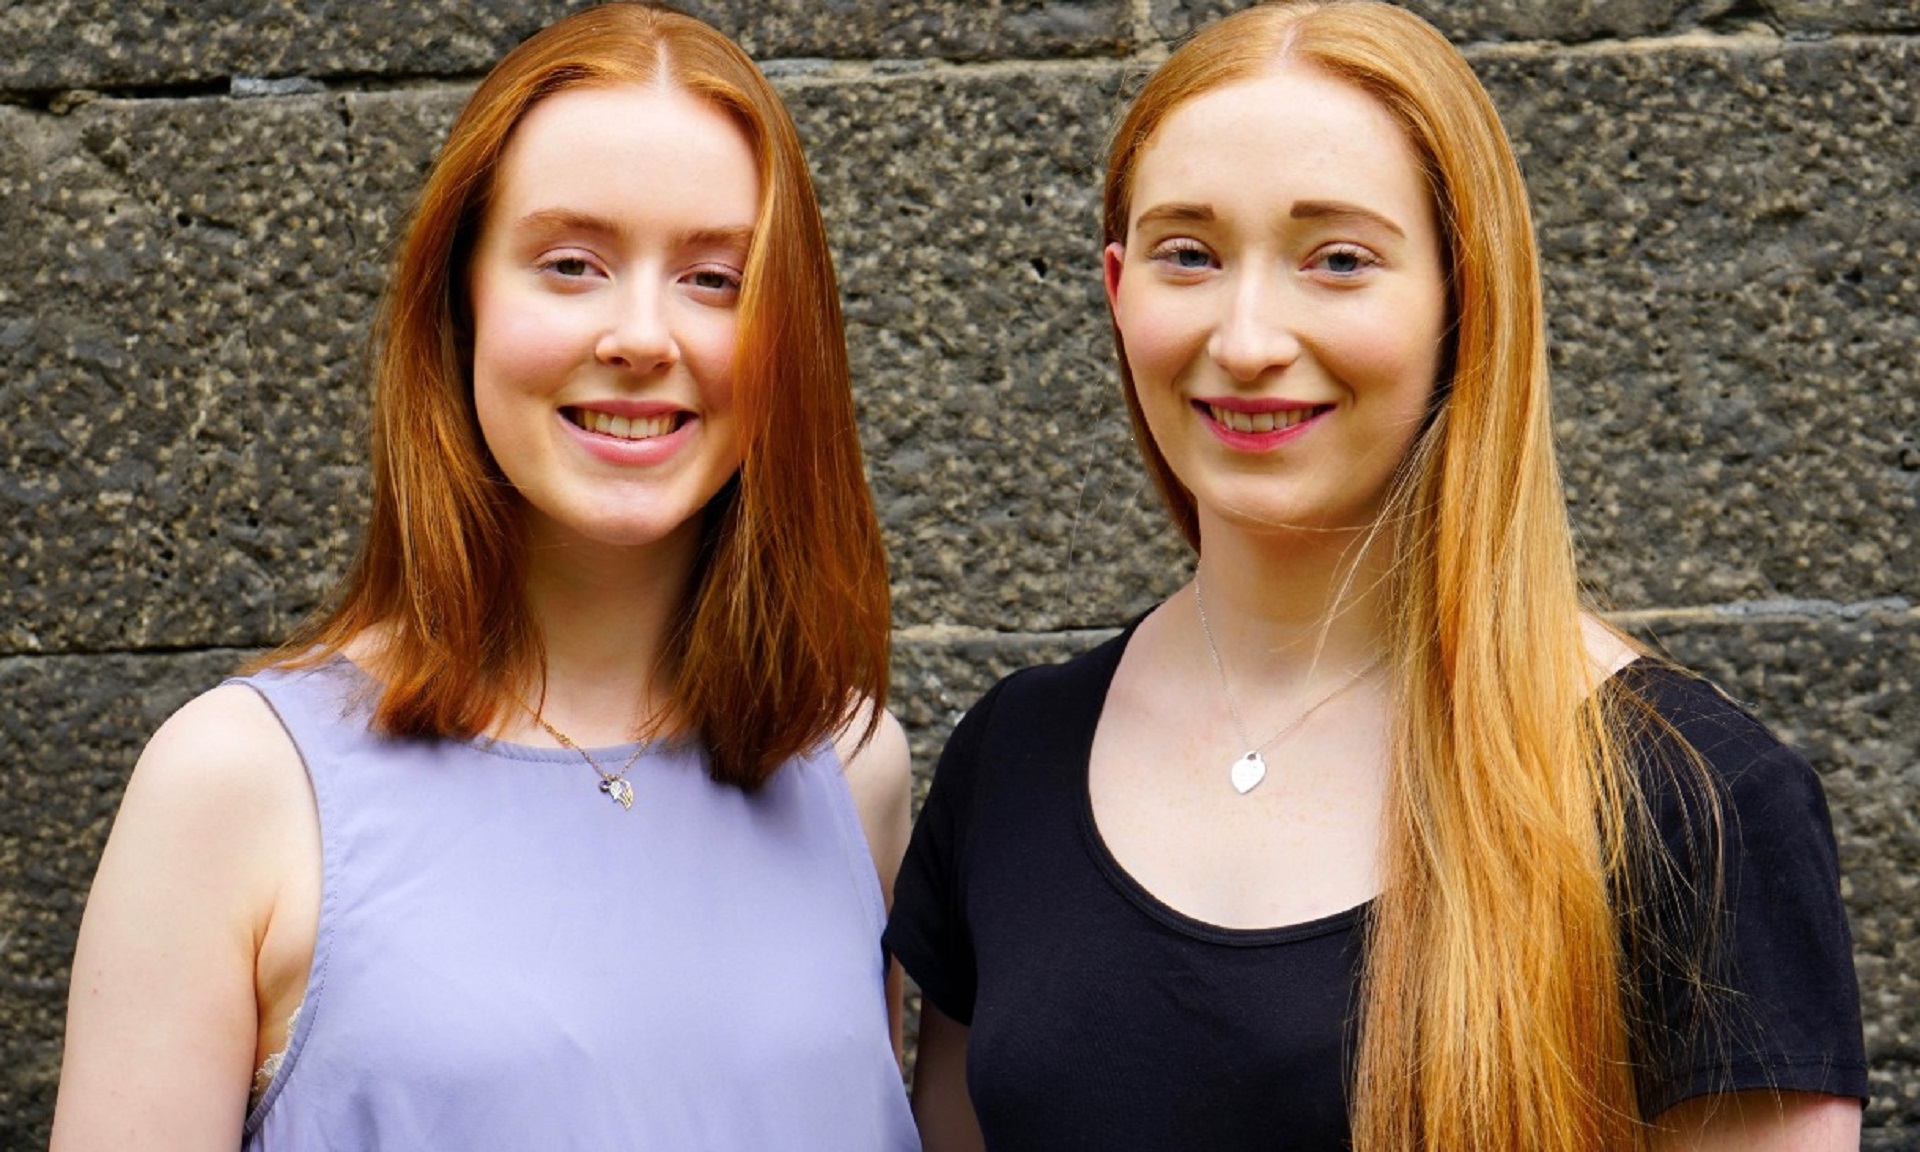 Journalism students Rachael Merritt and Carissa Shale are off to Japan on an AJF scholarship. Photo: Alexander Blain.